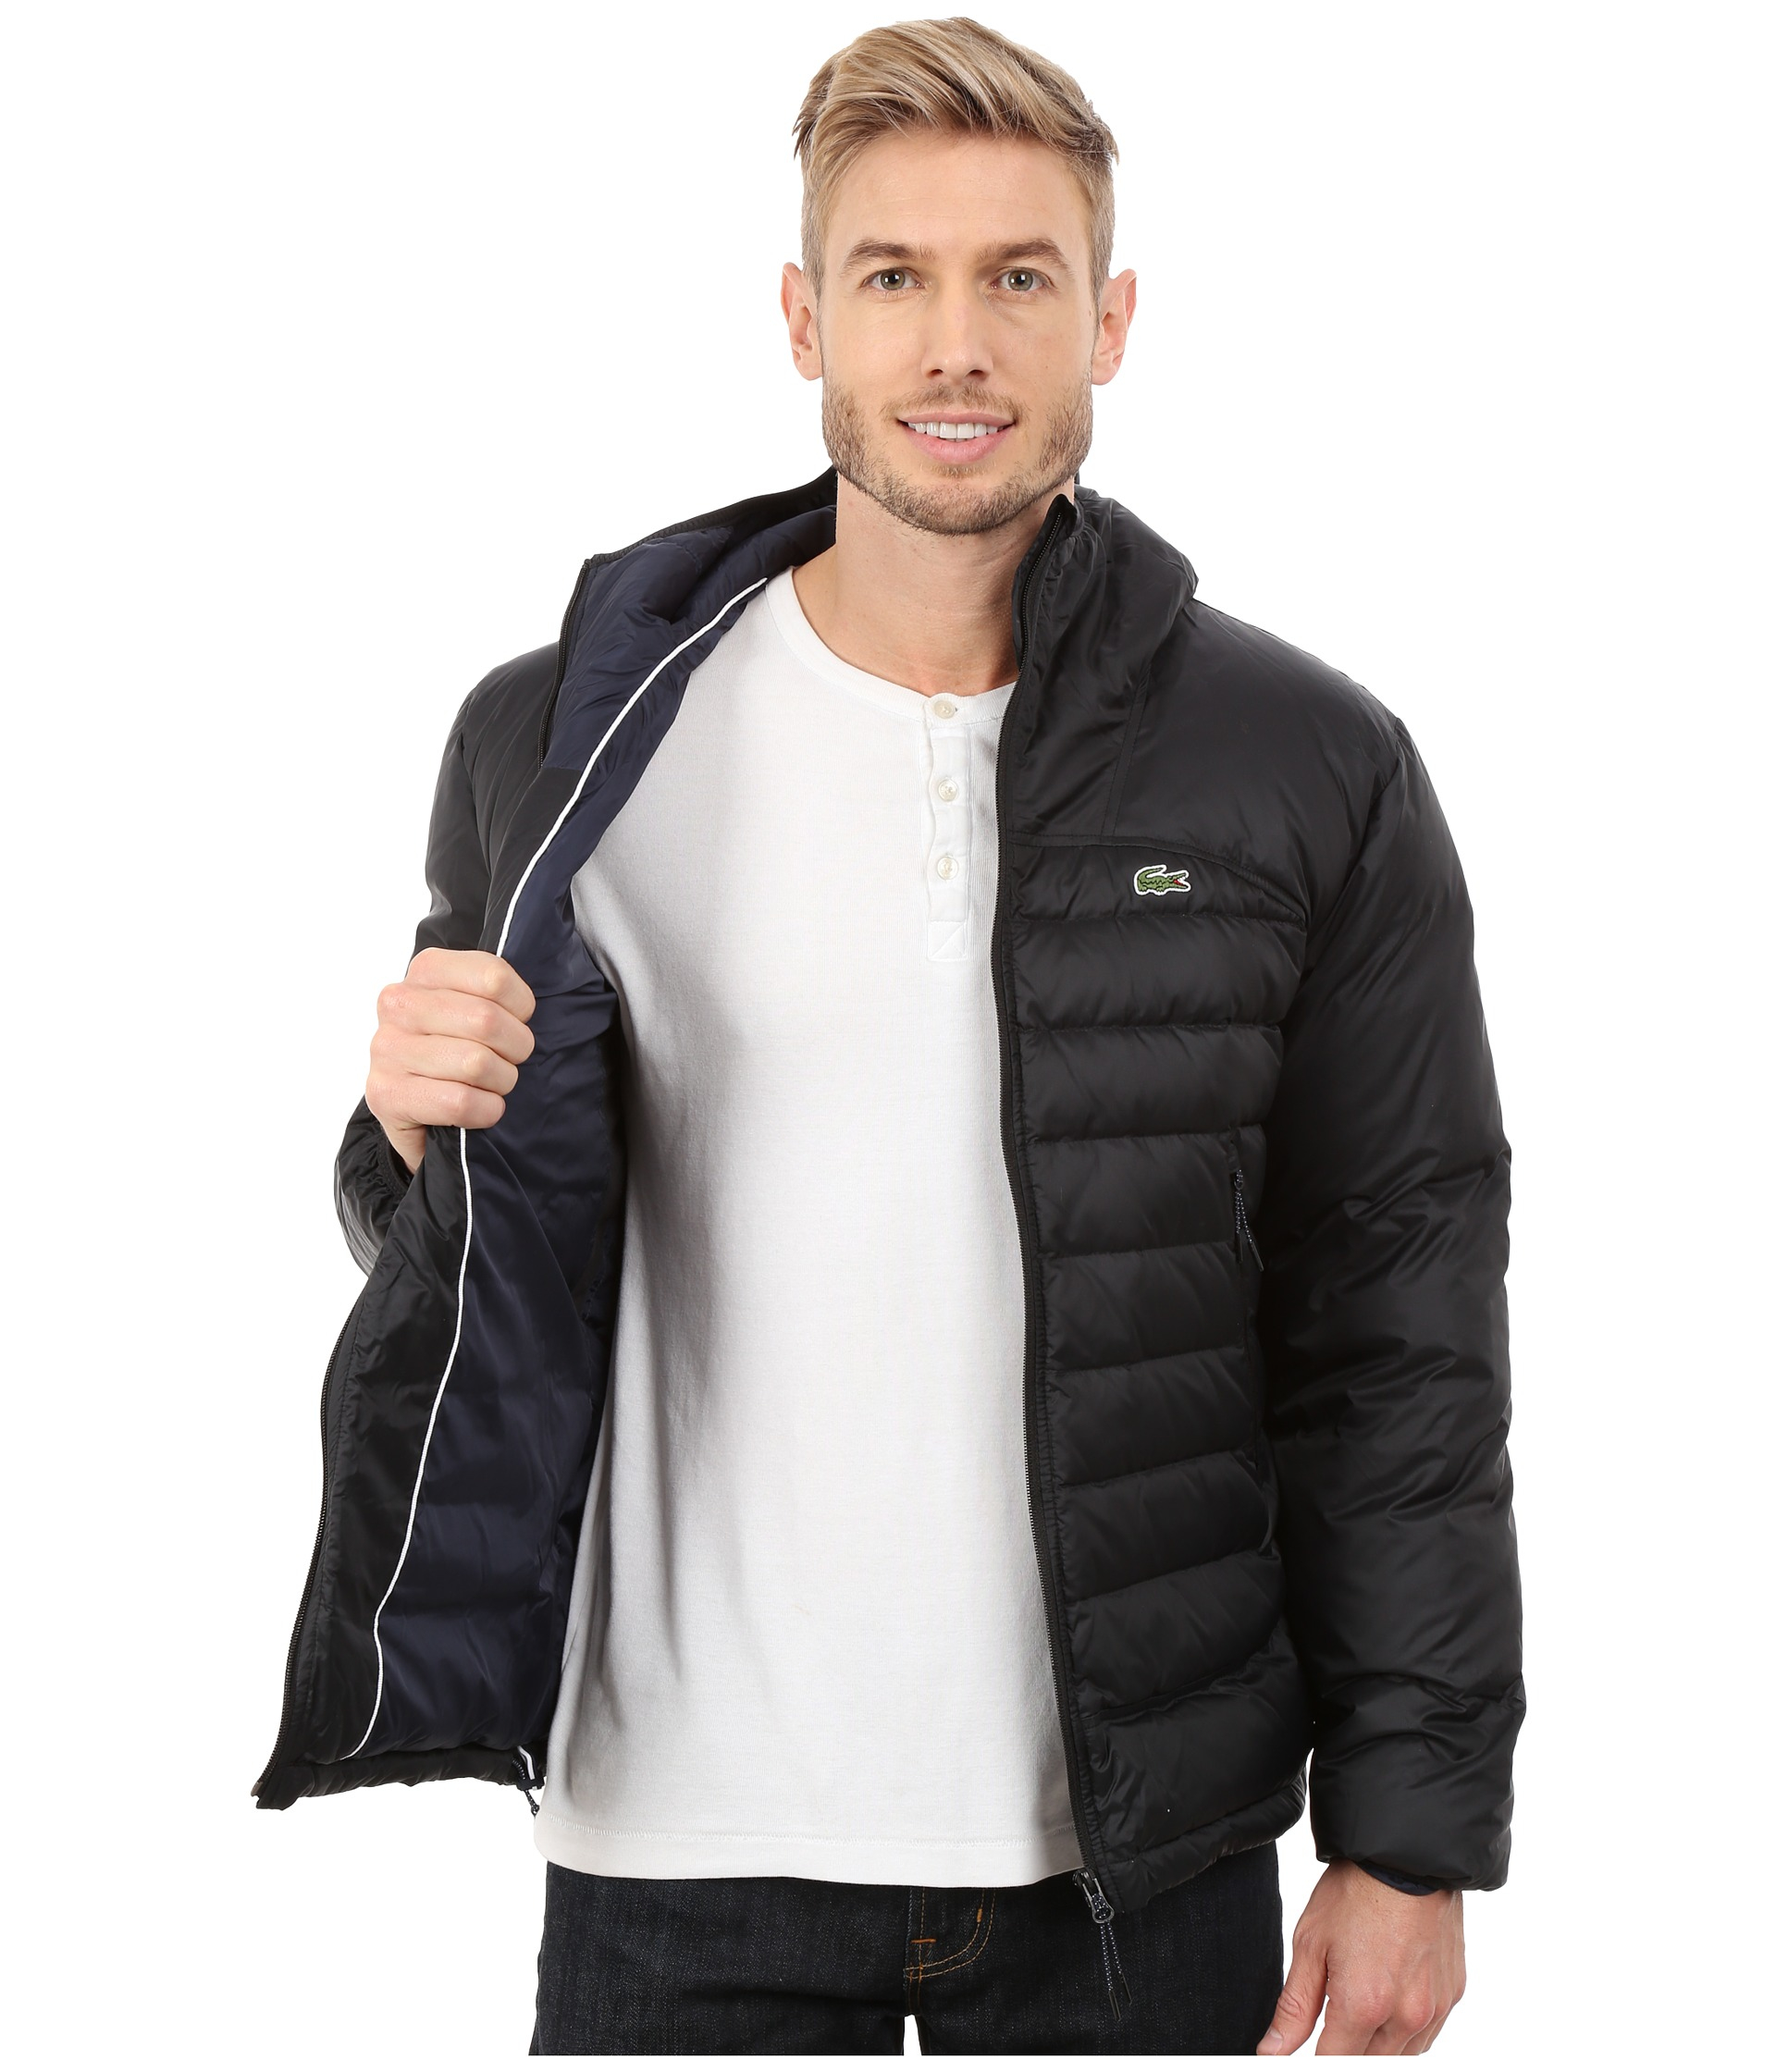 Lacoste Light Weight Packable Down Jacket in Black for Men - Lyst